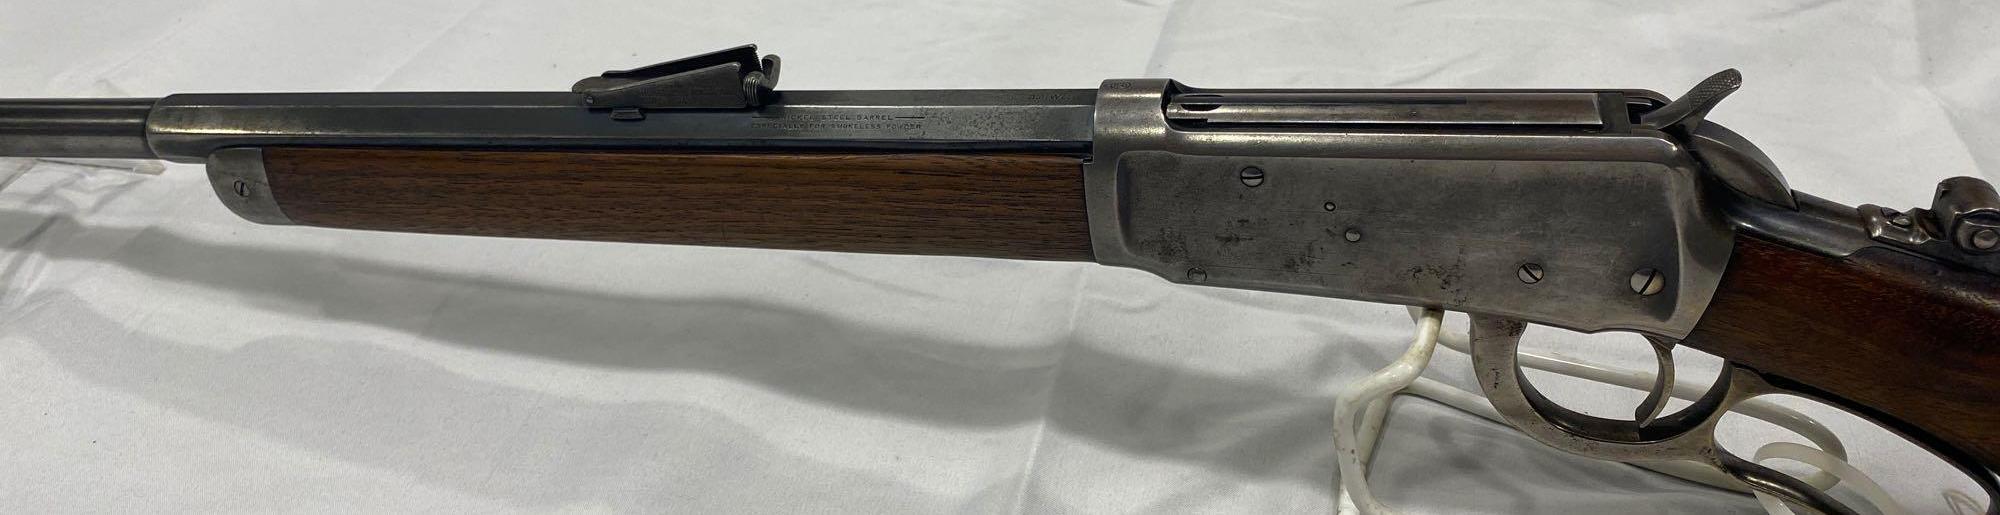 WINCHESTER M1894 .32 WS LEVER ACTION SPORTING RIFLE